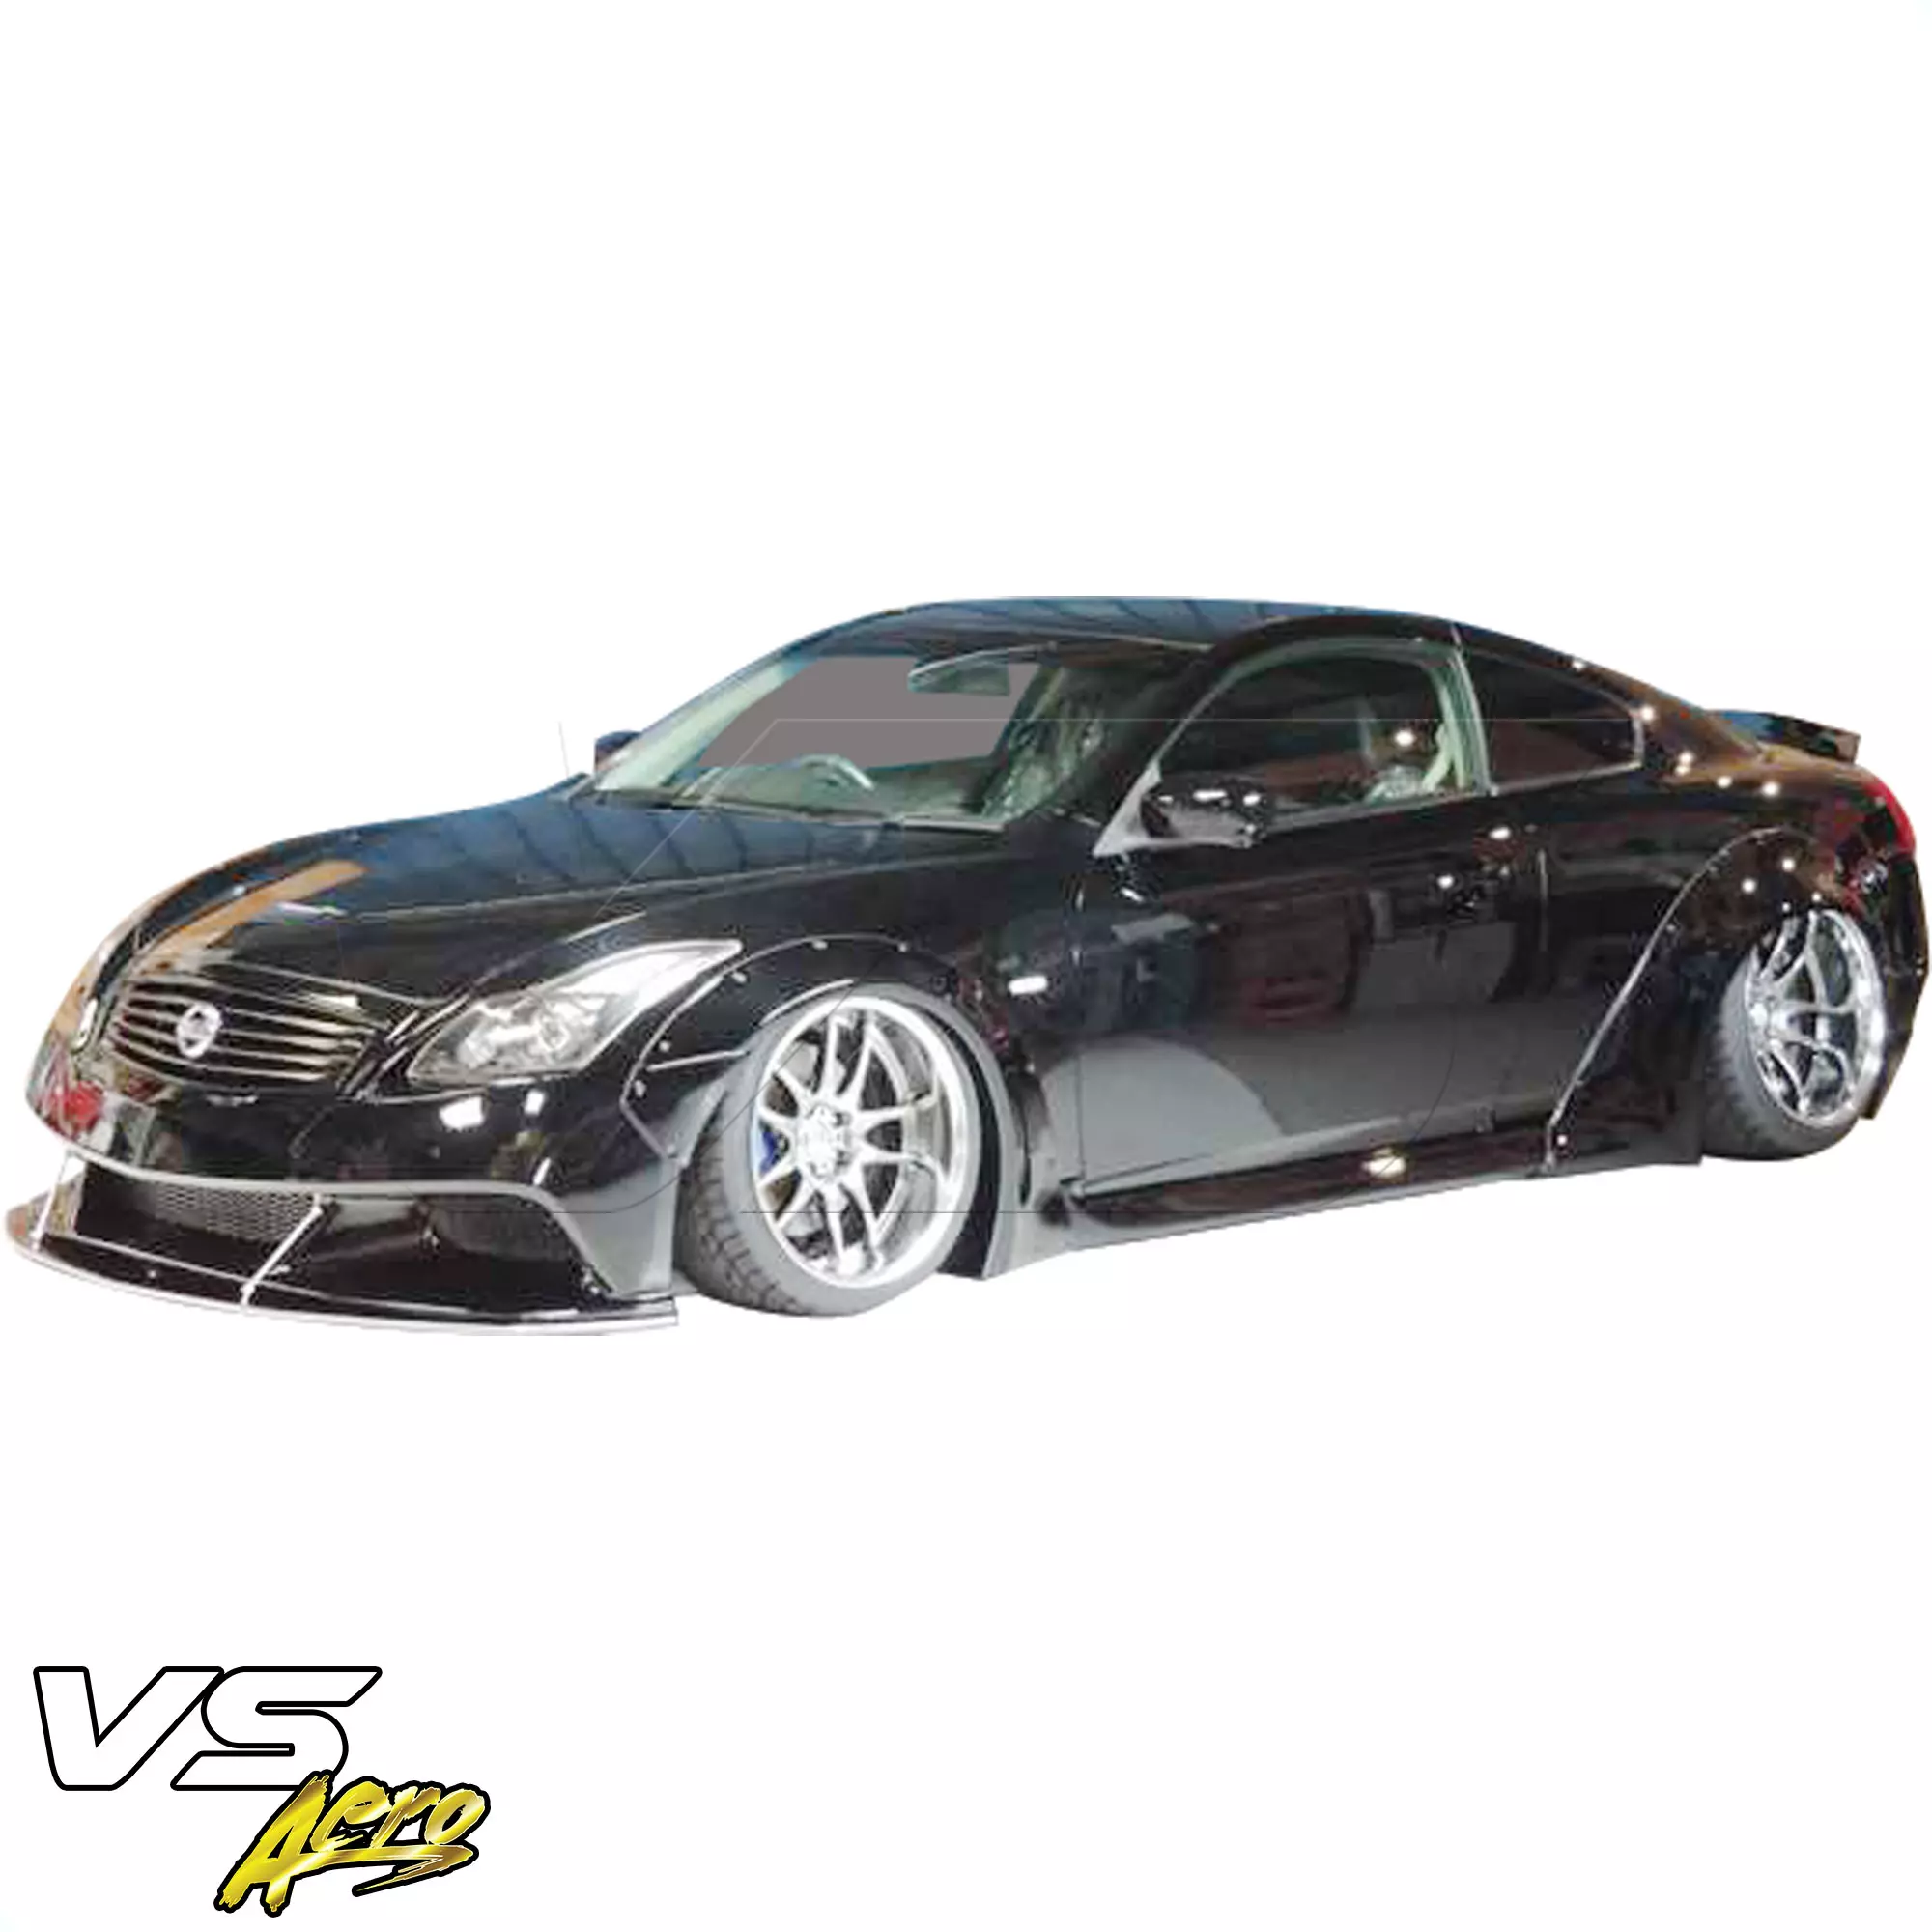 VSaero FRP LBPE Wide Body Fender Flares (front) 4pc > Infiniti G37 Coupe 2008-2015 > 2dr Coupe - Image 36